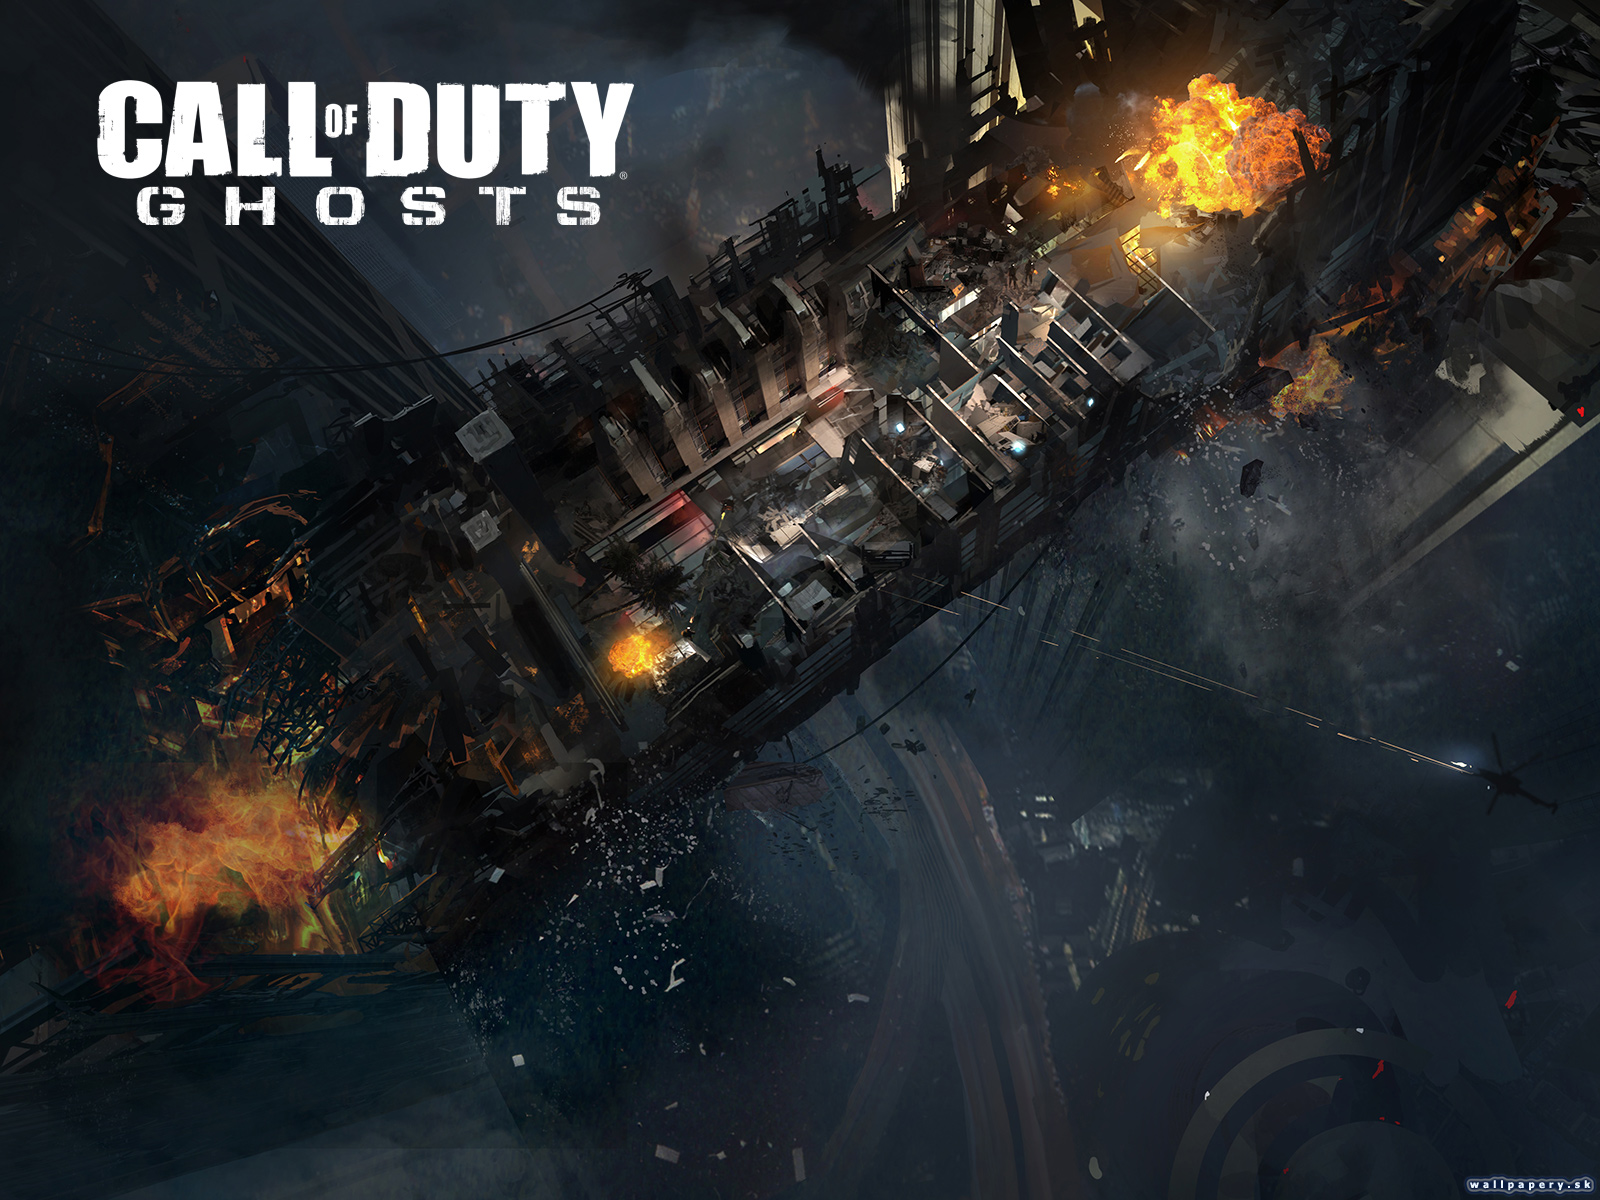 Call of Duty: Ghosts - wallpaper 7